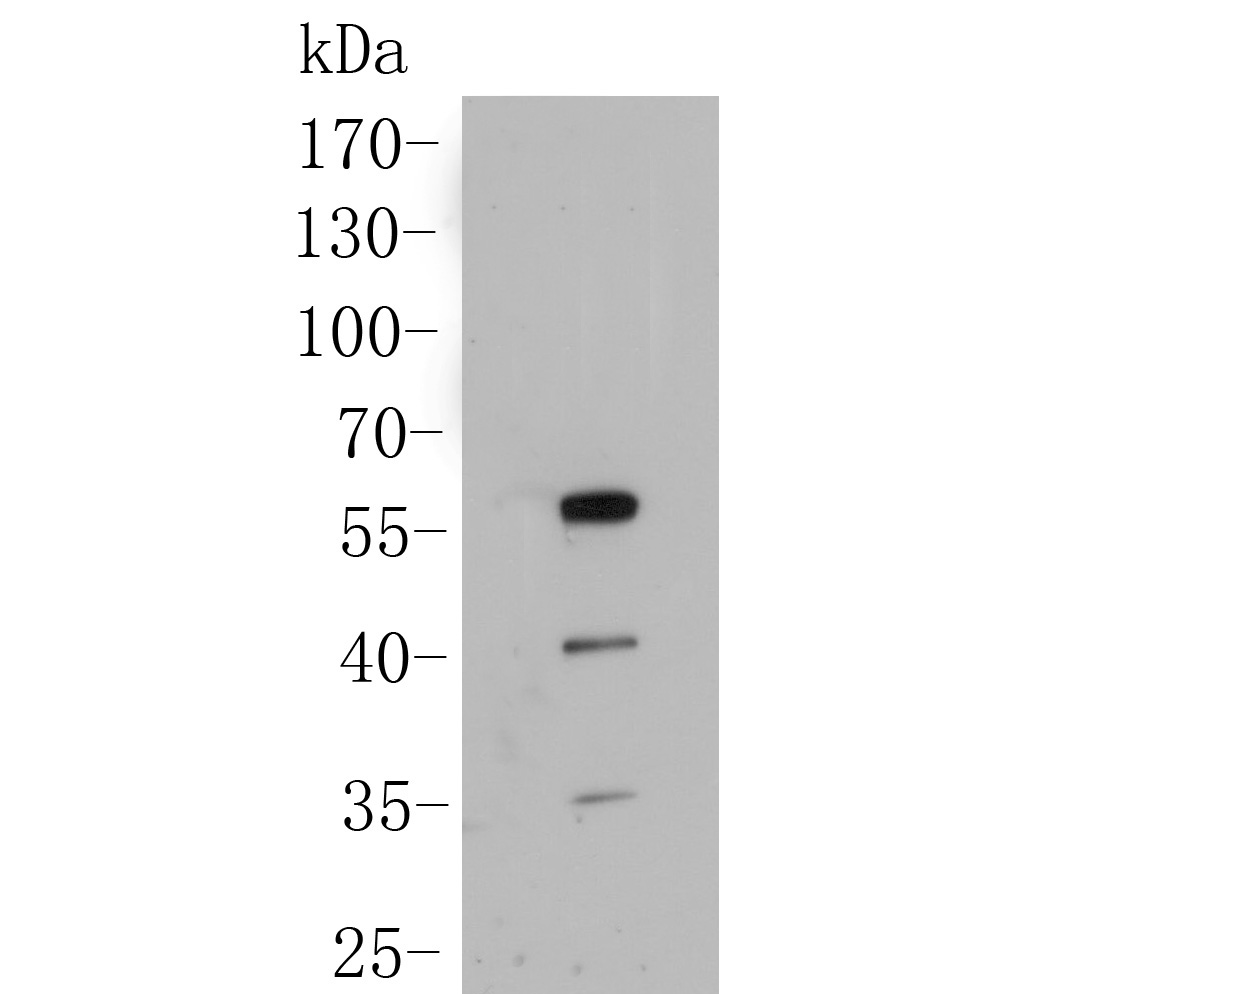 Western blot analysis of SHE on Zebrafish tissue lysate. Proteins were transferred to a PVDF membrane and blocked with 5% BSA in PBS for 1 hour at room temperature. The primary antibody (ER1902-03, 1/500) was used in 5% BSA at room temperature for 2 hours. Goat Anti-Rabbit IgG - HRP Secondary Antibody (HA1001) at 1:5,000 dilution was used for 1 hour at room temperature.